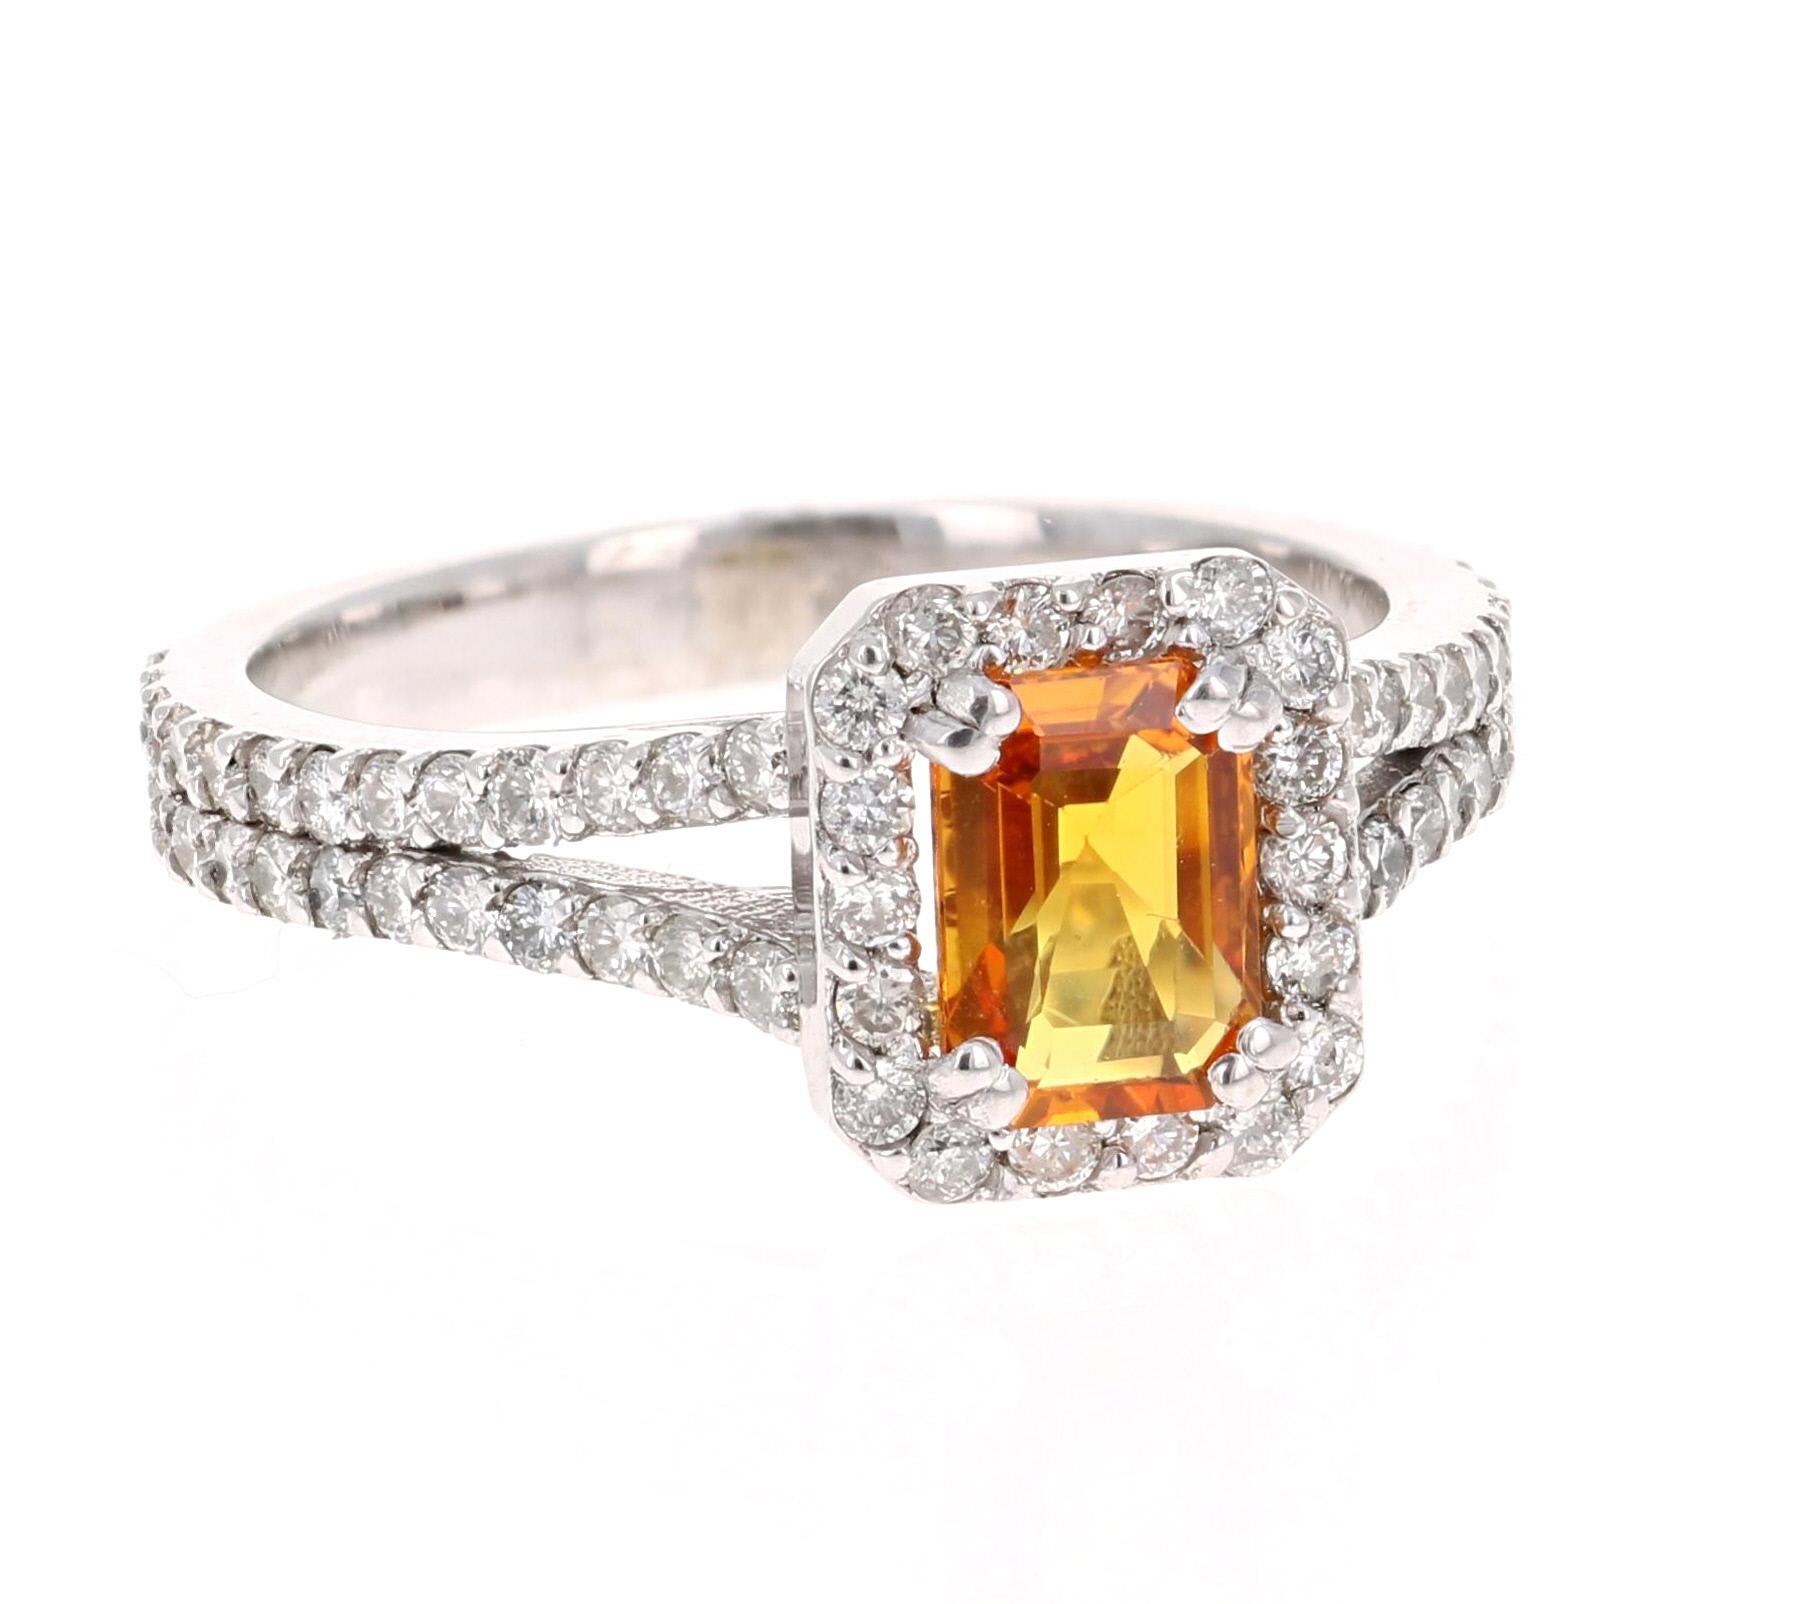 A gorgeous Orange Sapphire and Diamond Ring set in White Gold. It can be the most beautiful and unique Engagement Ring. 
The Emerald Cut Orange Sapphire is 1.12 carats and is surrounded by 70 Round Cut Diamonds weighing 0.84 Carats. The total carat